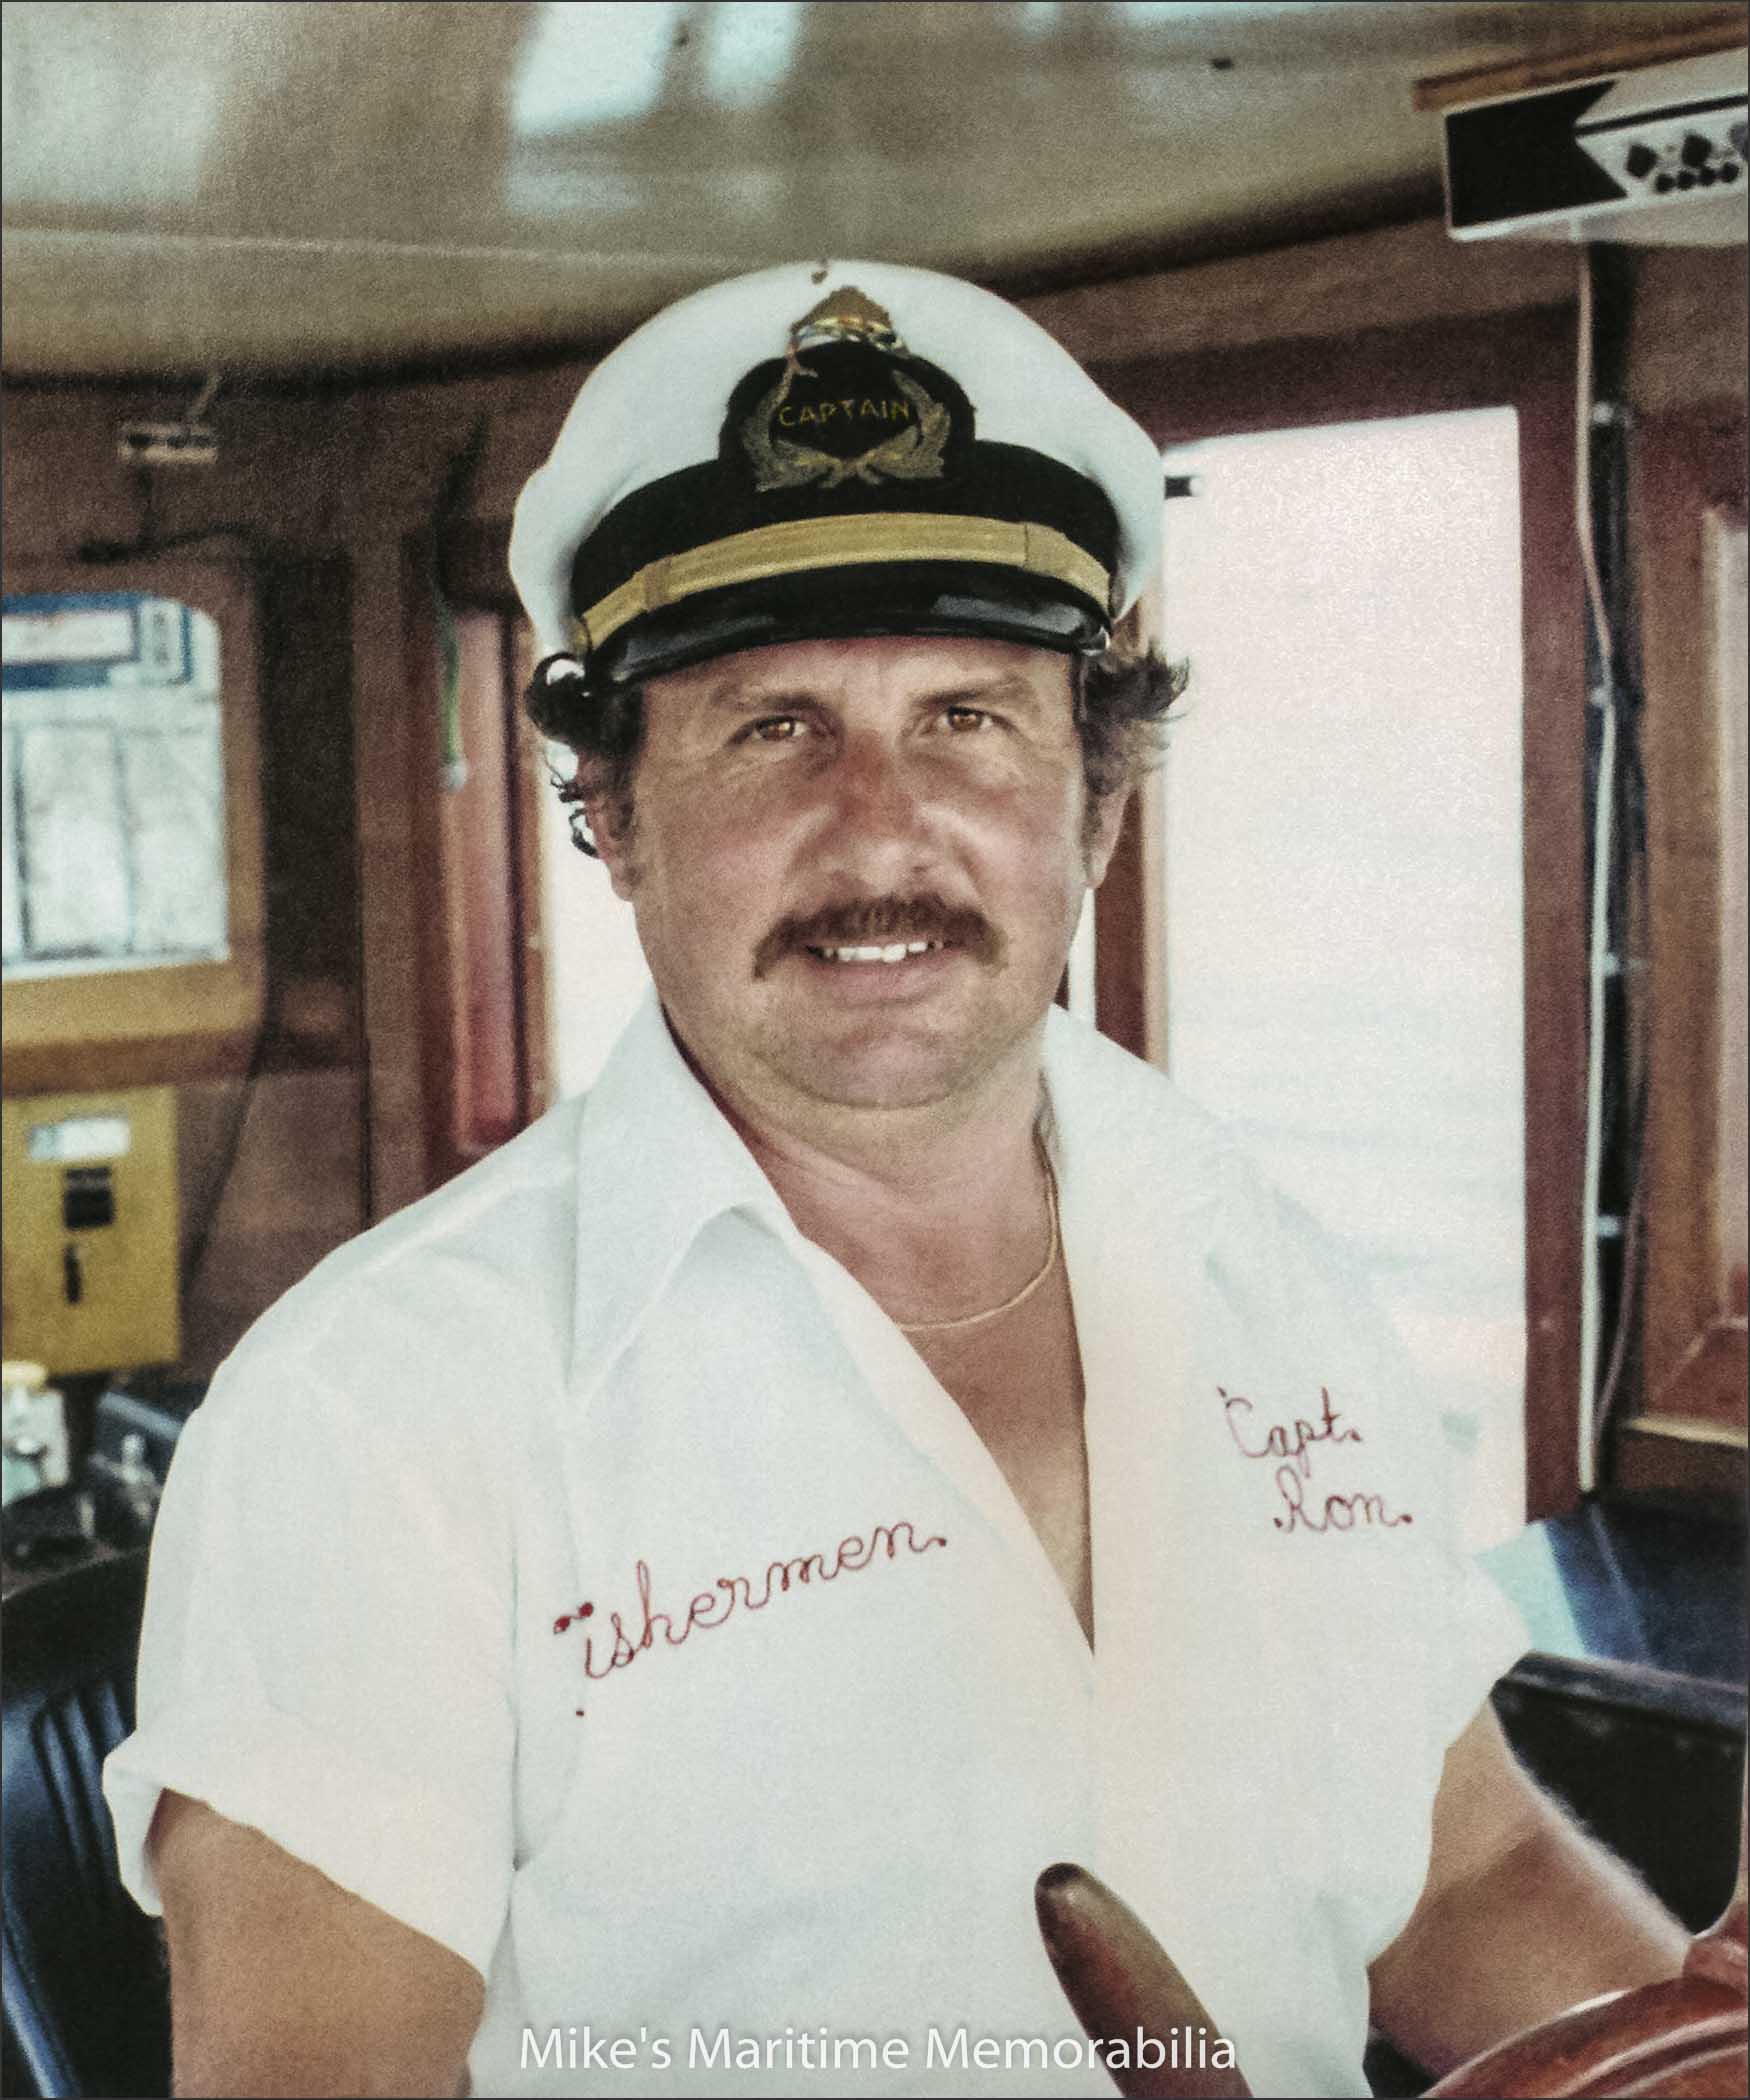 Captain Ron Santee Sr., Atlantic Highlands, NJ – 1974 Captain Ron Santee Sr. at the helm of the "FISHERMEN" from Atlantic Highlands, NJ circa 1974. Captain Ron's fishing career started in 1955 when he passed his Coast Guard exam at the age of 19. The following year he started operating an old 45-footer named the "FISHER BOY" from the Sandy Hook Bay marina. He then sailed from the Highlands Marina for several years before renaming the boat "FISHERMEN" and moving the business to Atlantic Highlands, NJ. His second "FISHERMEN" was a converted Air Sea Rescue boat and his third "FISHERMEN" was a Stevenson built boat. In 1985, a new "FISHERMEN" boat arrived from Lydia Yachts at Stuart, FL and it is still sailing today. After a successful career, Captain Ron retired in 2001 and Captain Ron Jr. took over the family business. Captain Ron Sr. is still a daily fixture on the boat and hasn't lost his passion for fishing.